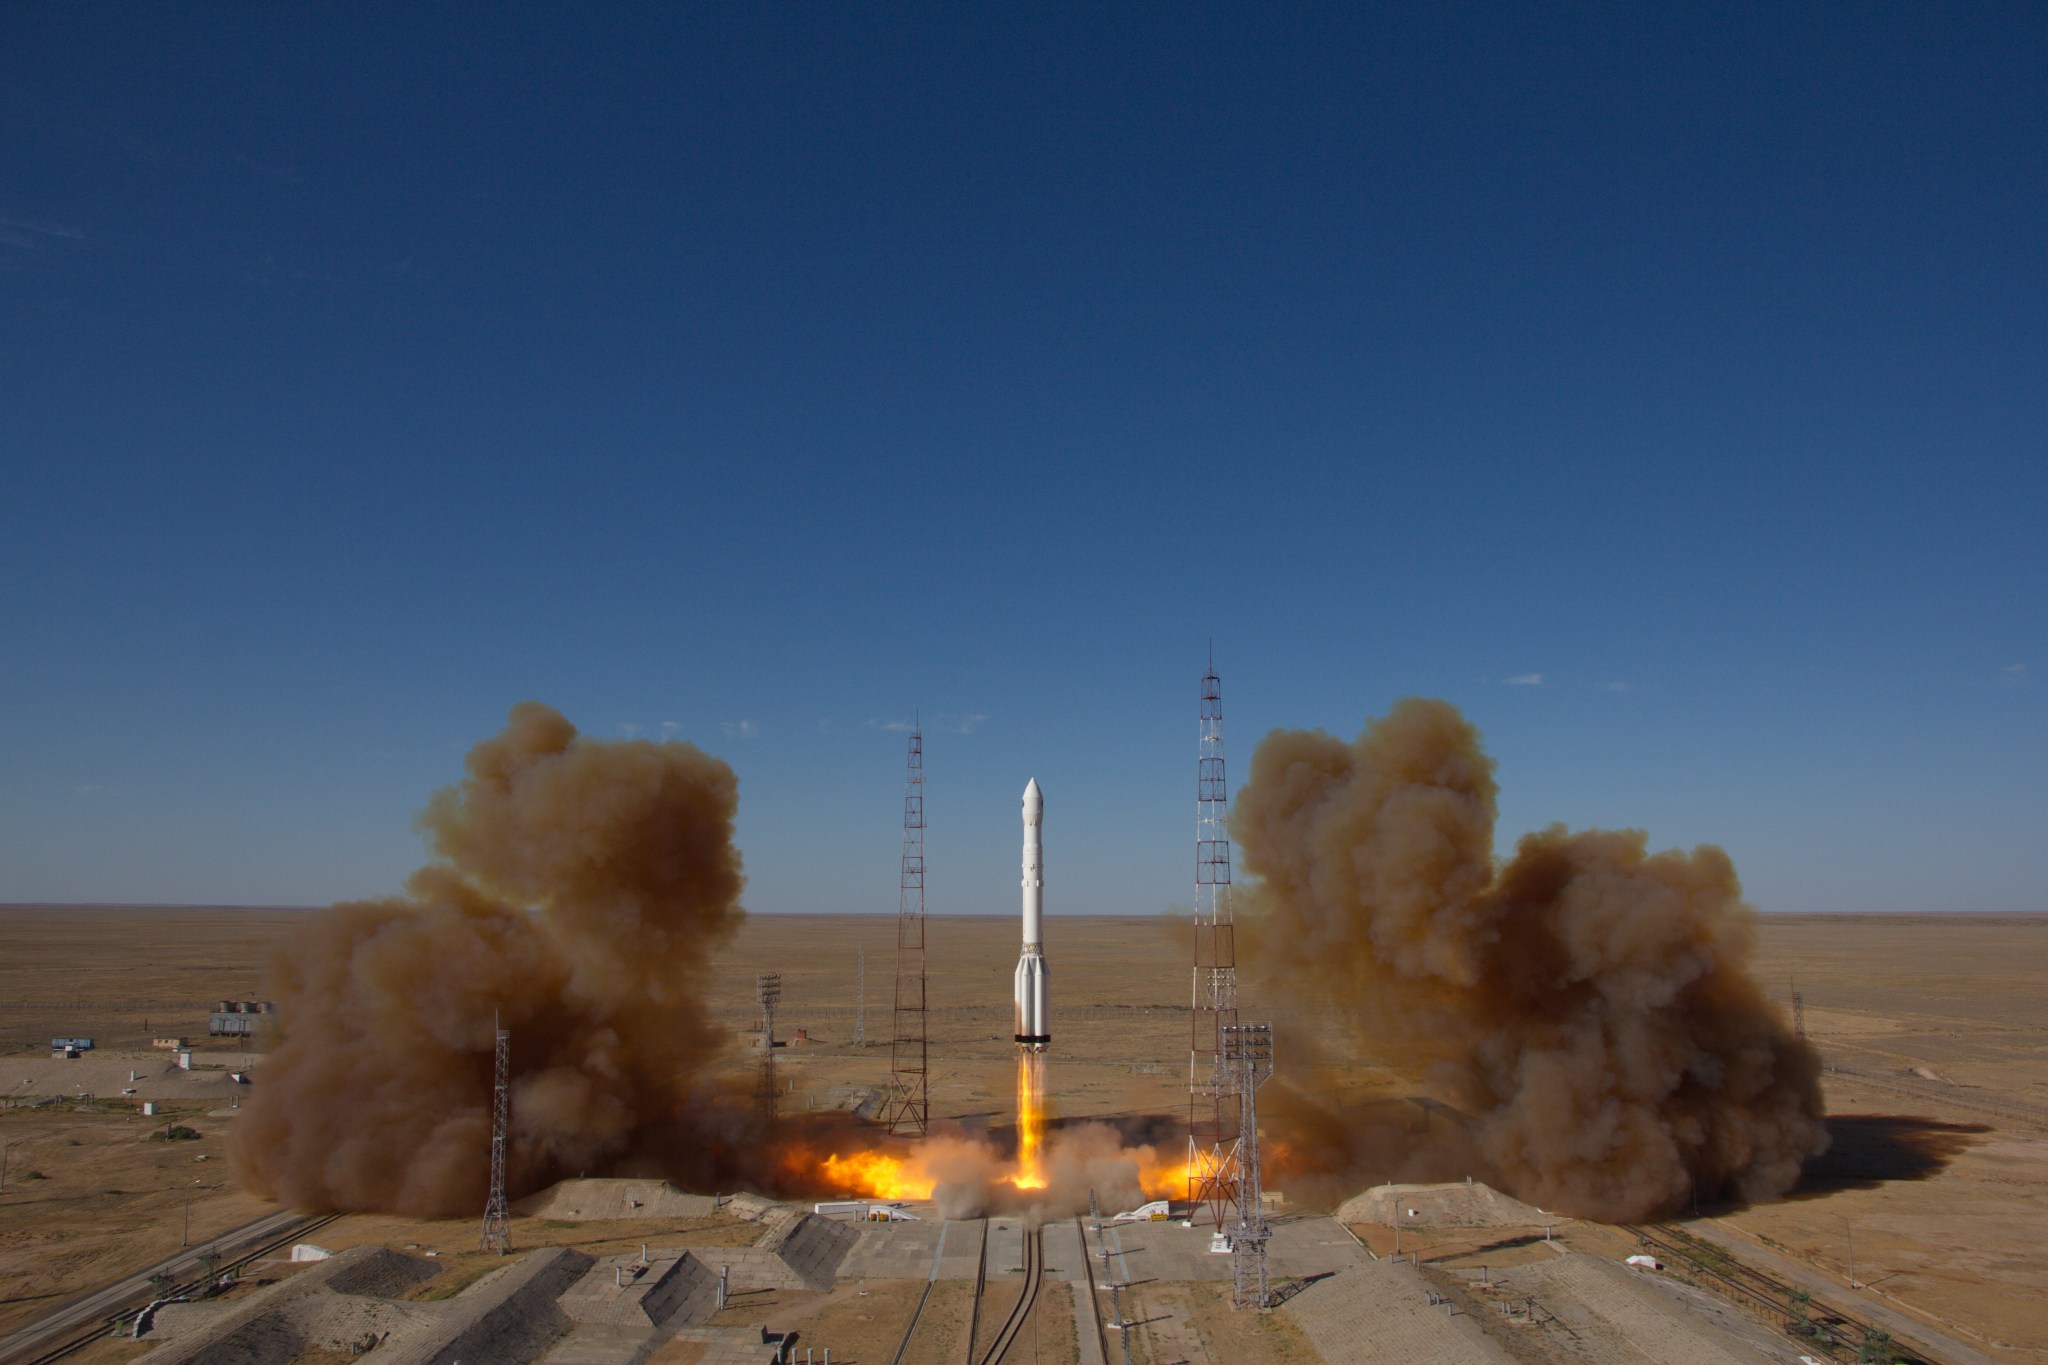 The Spectrum X-Gamma mission launched from the Baikonur Cosmodrome in the Republic of Kazakhstan on July 13, 2019.